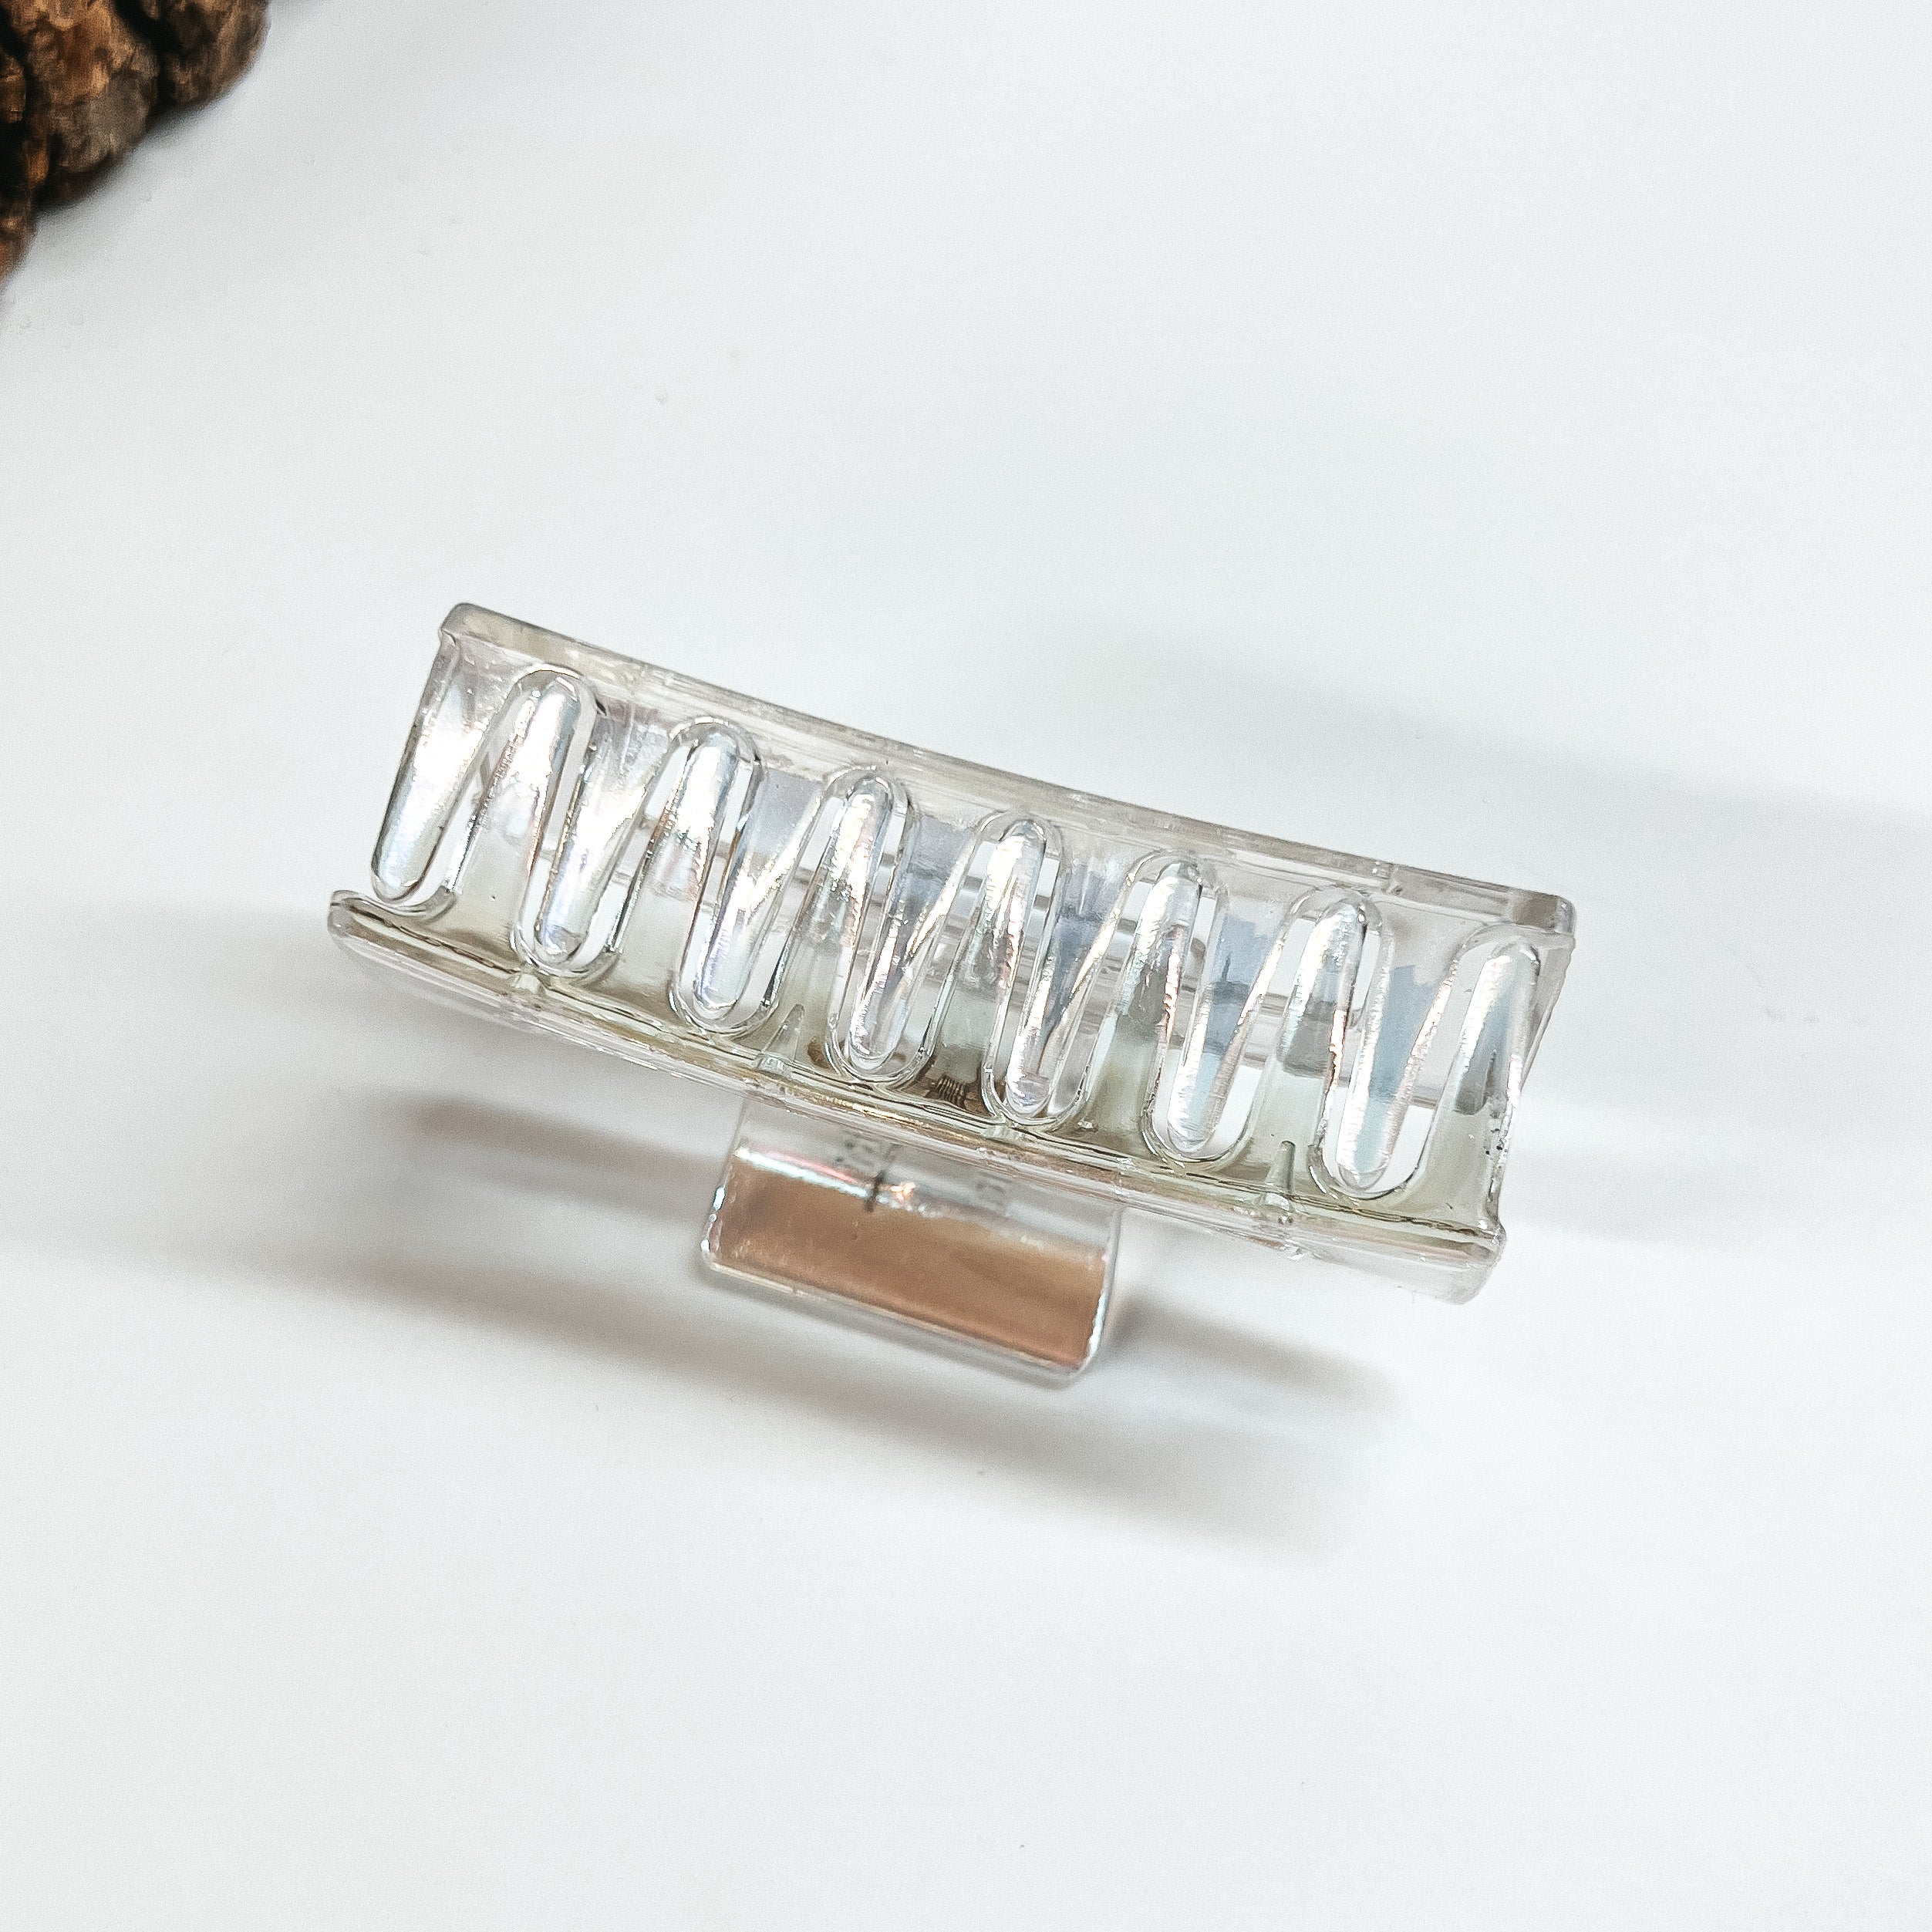 Buy 3 for $10 |  Medium Sized Clear Iridescent Hair Clip - Giddy Up Glamour Boutique